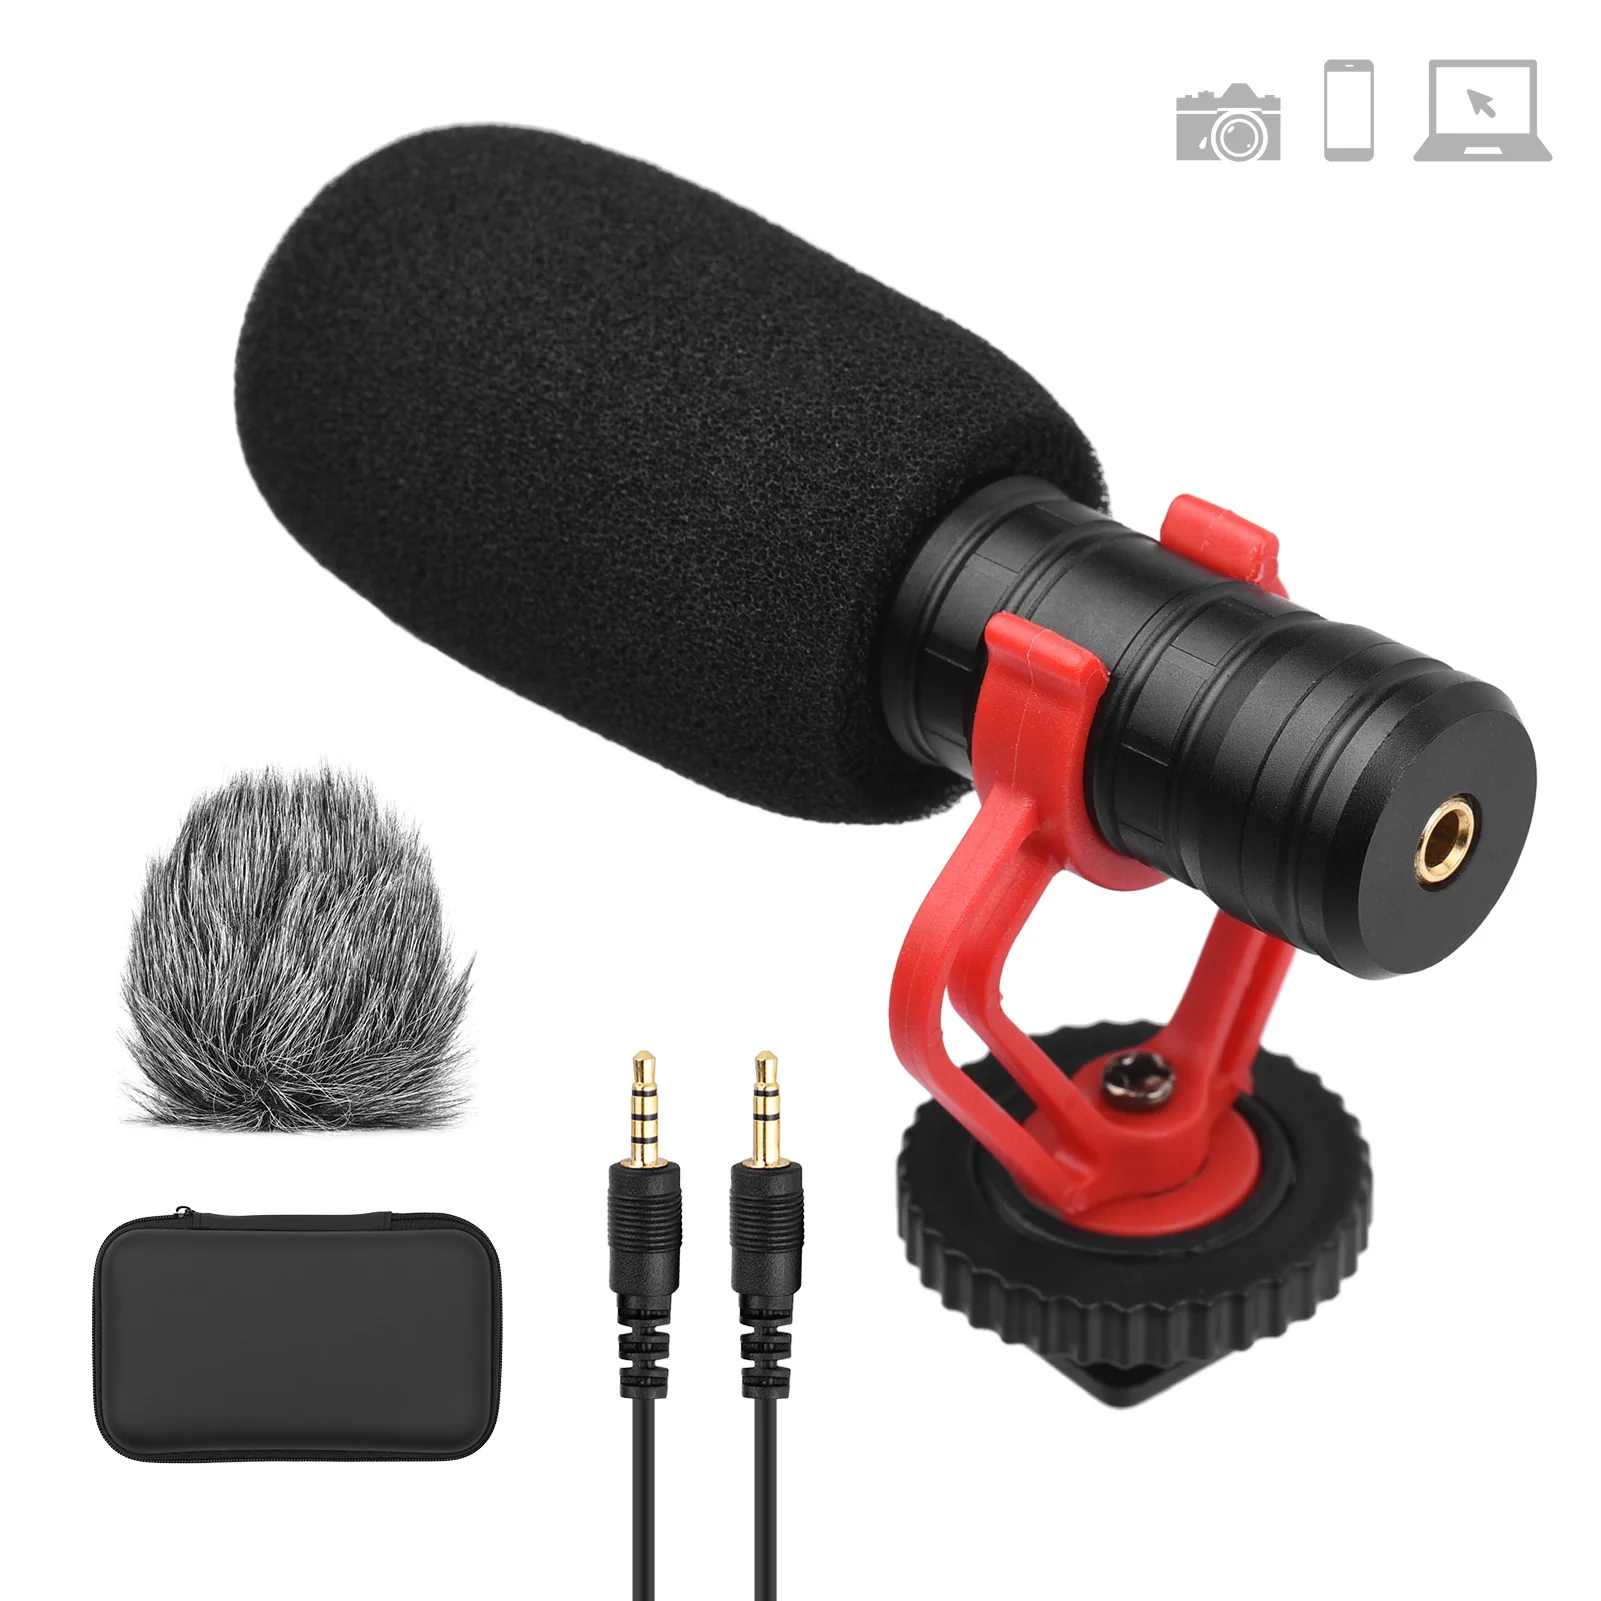 

Andoer Camera Microphone Cardioid Condenser Mic Mini Microphone Carrying Case for Phones Camera for Video Recording Interview